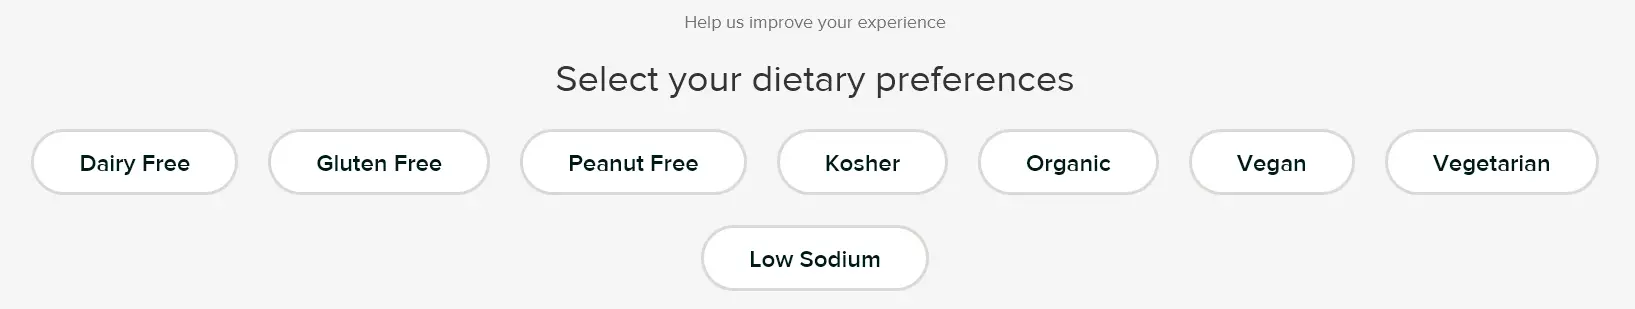 "select your dietary preferences"